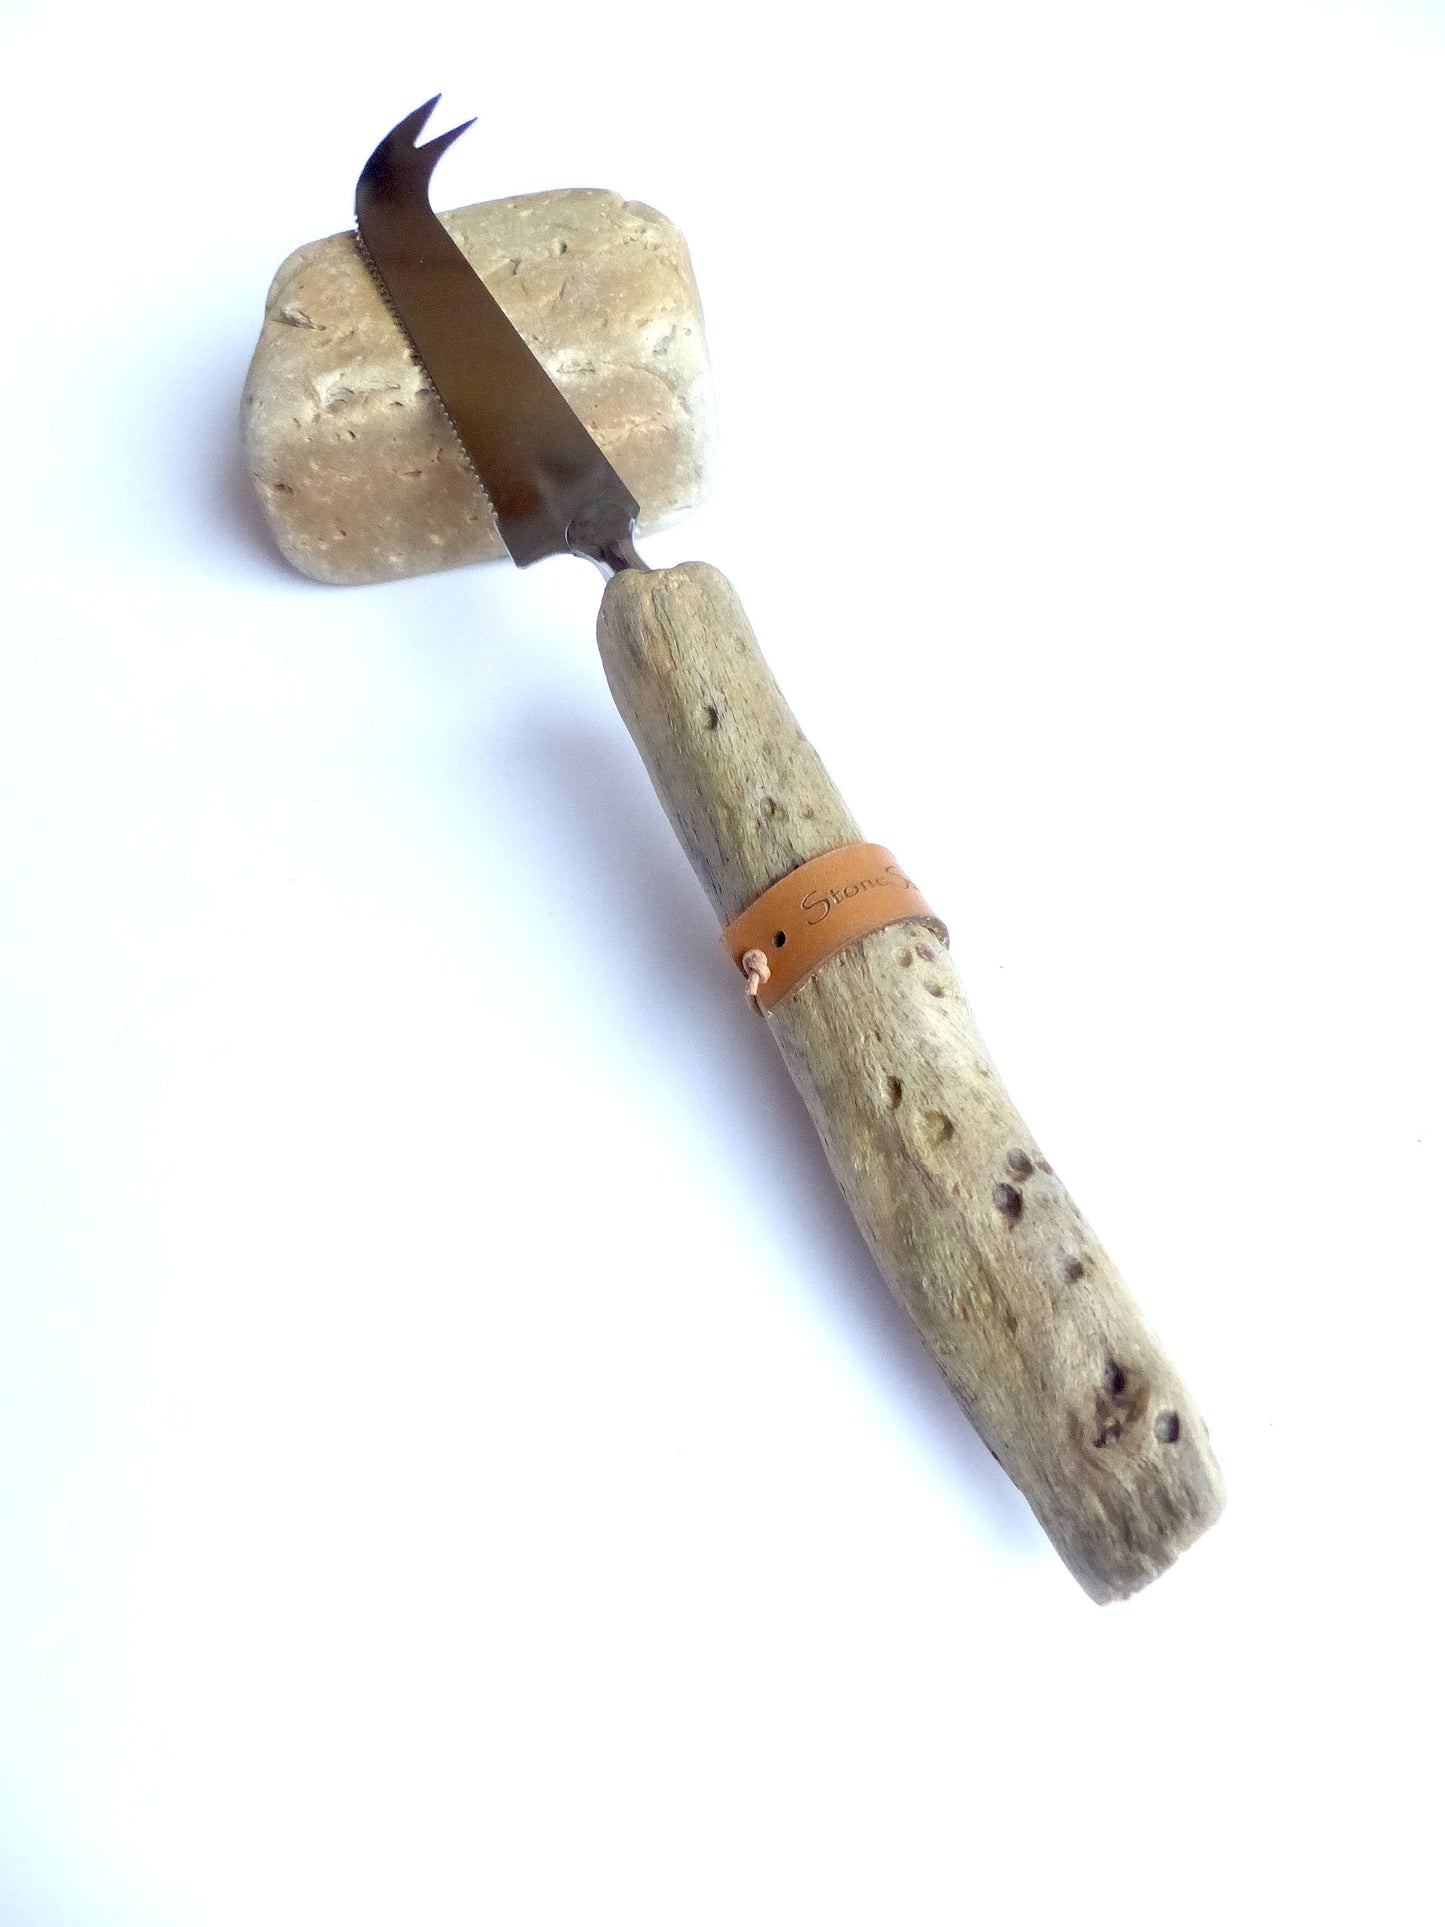 CHEESE KNIFE 'Knut' with DRIFTWOOD handle, handcrafted sustainable kitchenware